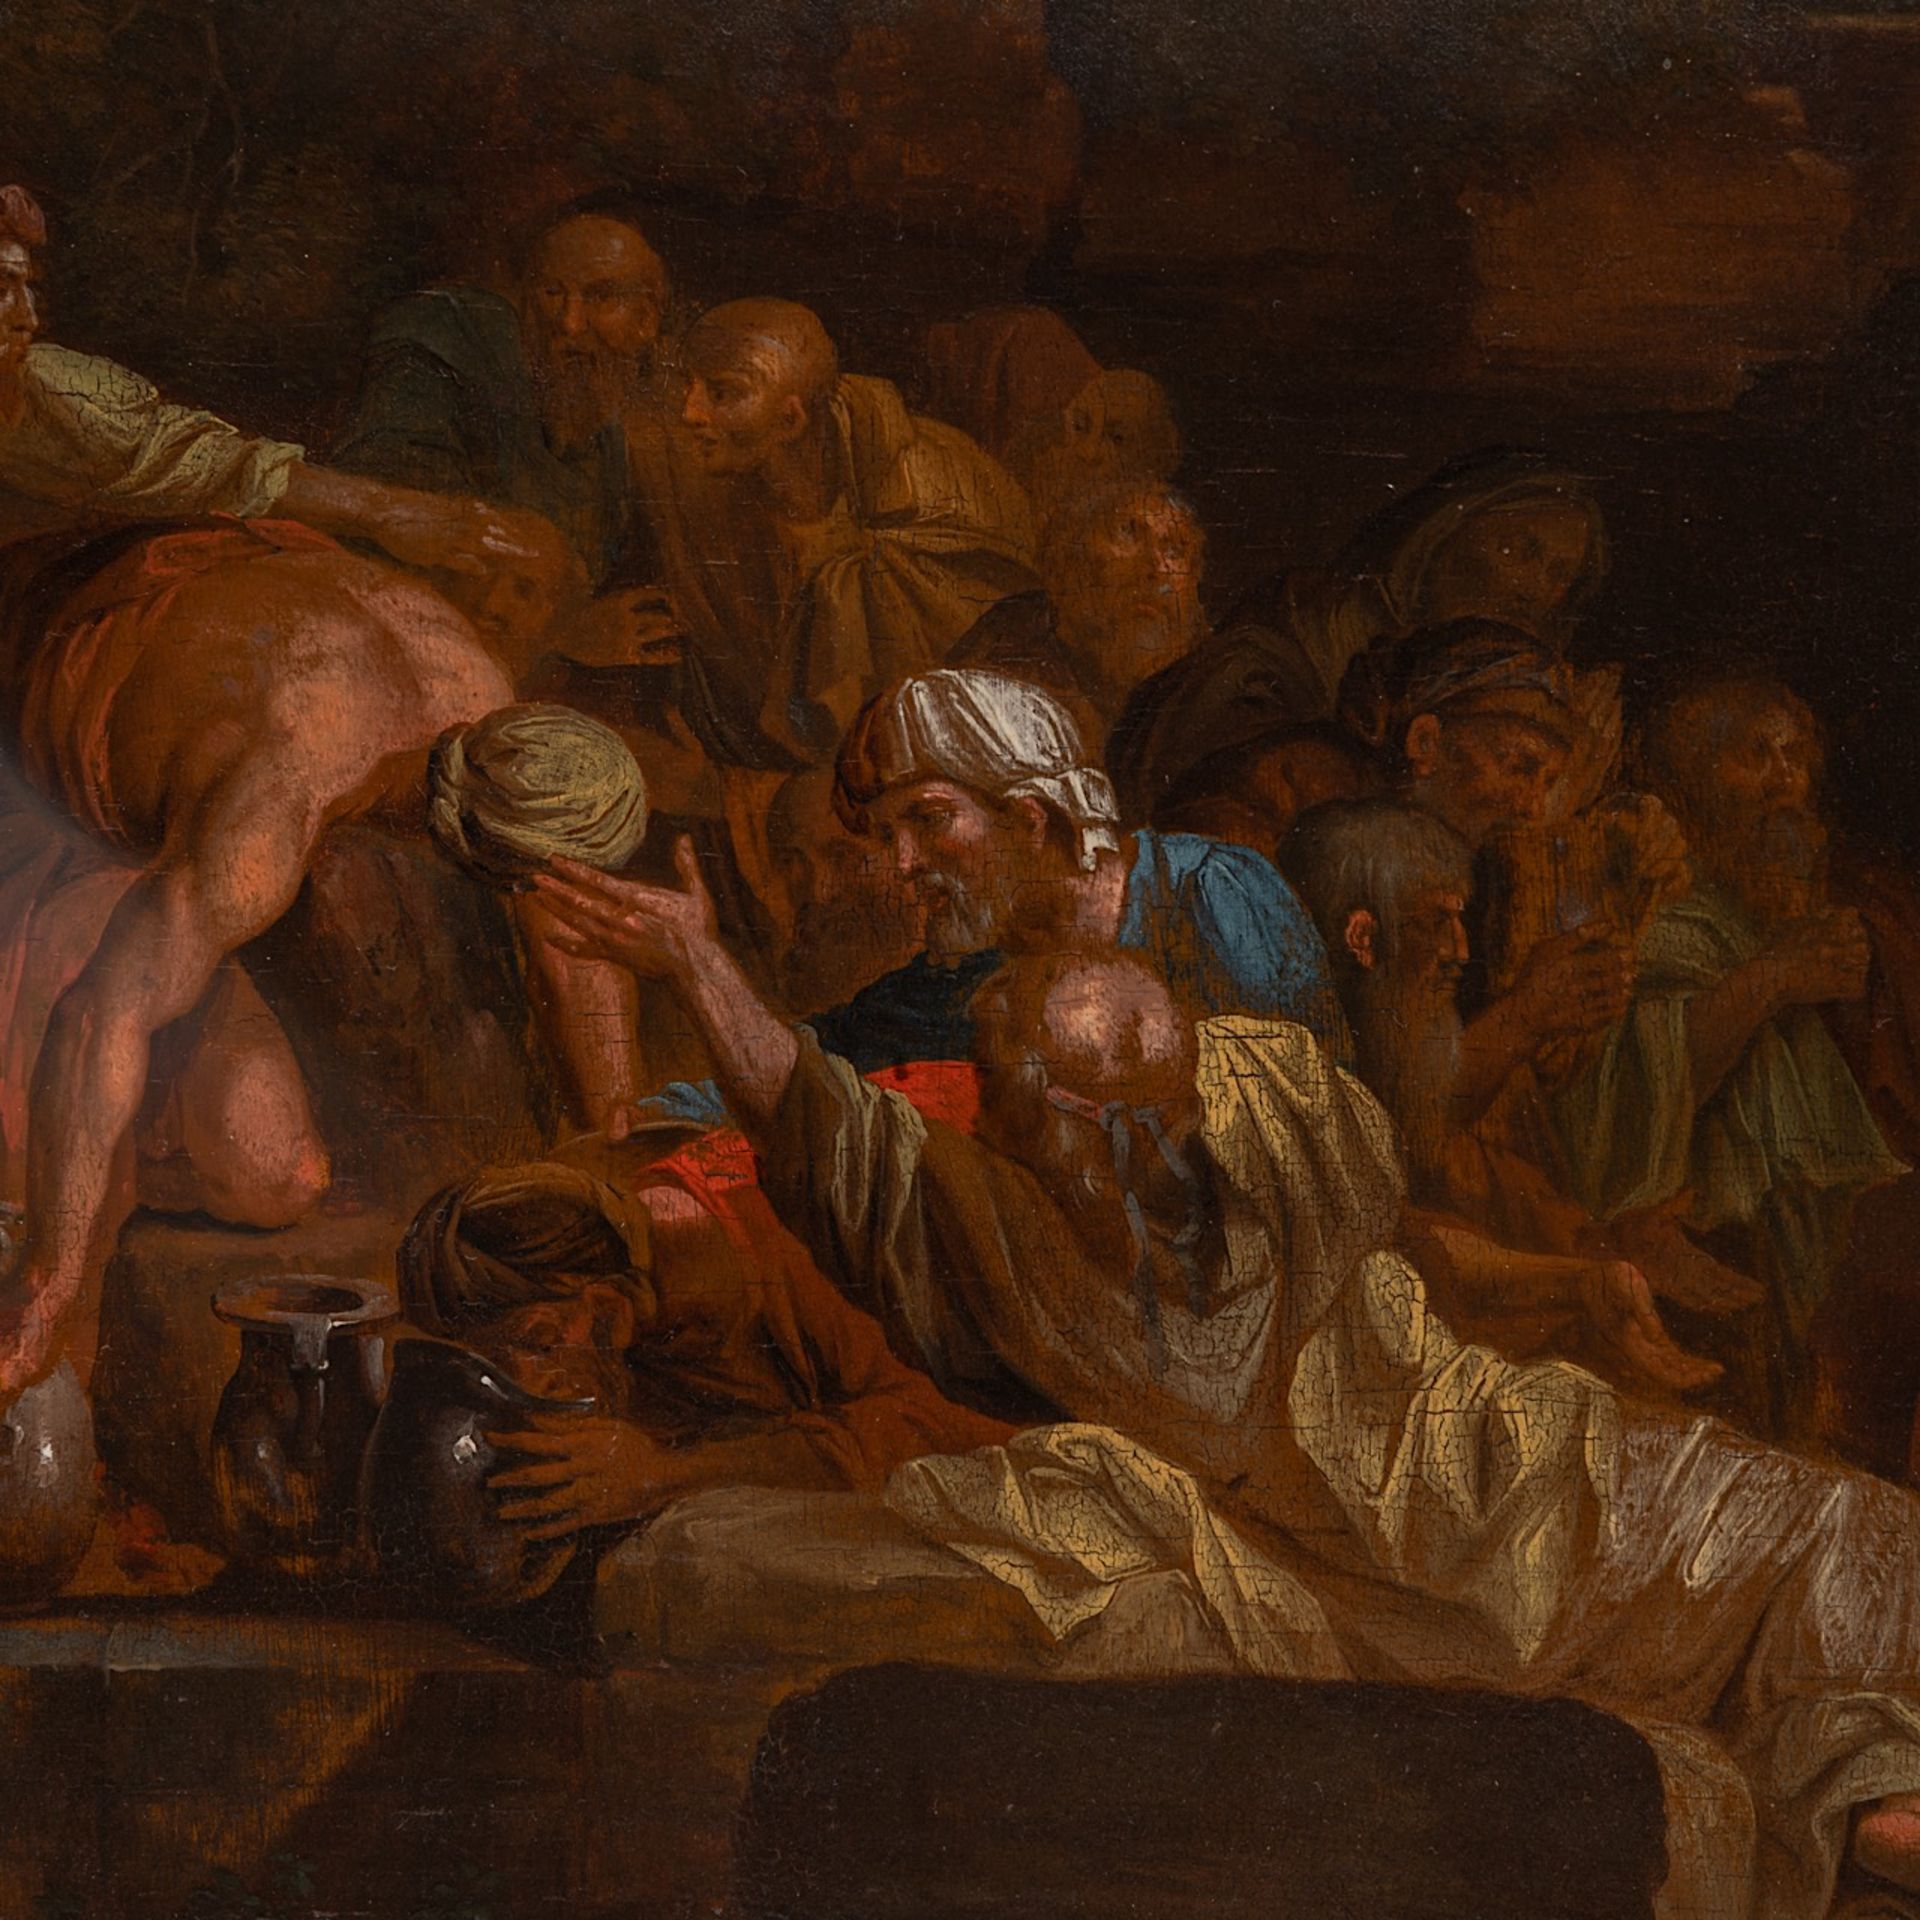 'To give water to the thirsty', French School, 17thC, oil on oak 43 x 55 cm. (16.9 x 21.6 in.), Fram - Image 4 of 6